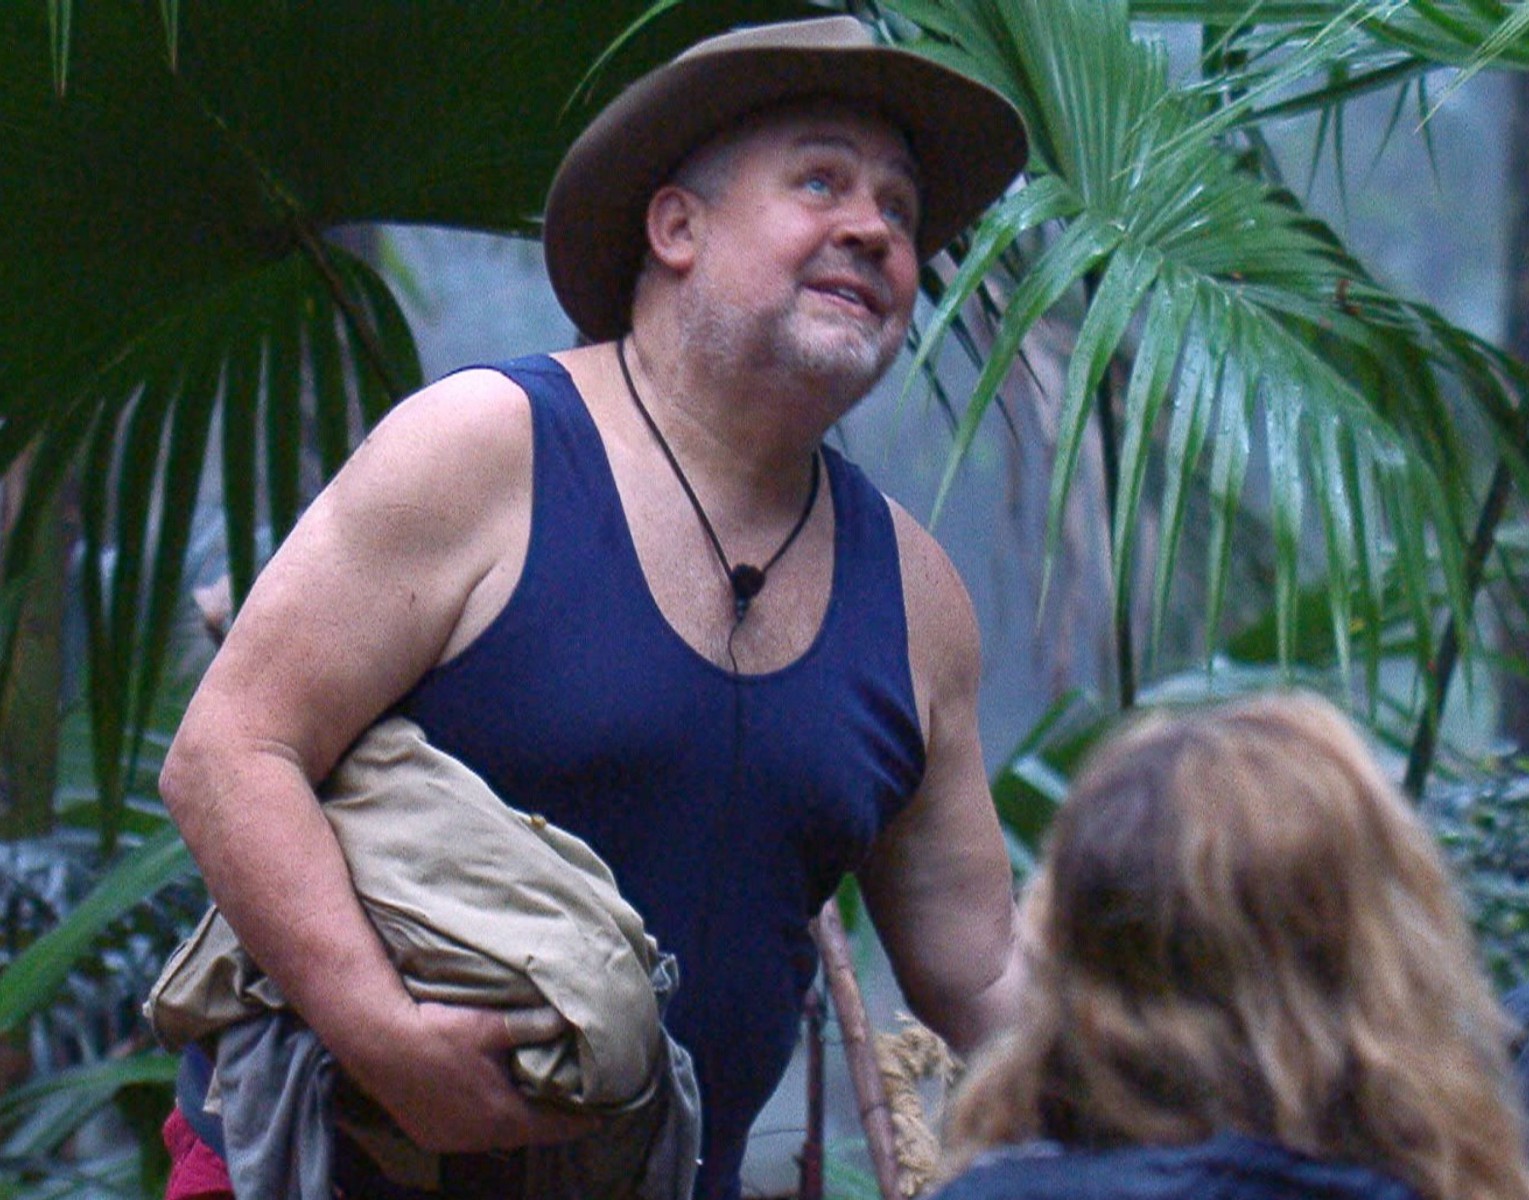 The former EastEnders star joined Im A Celebrity to pay a tax bill